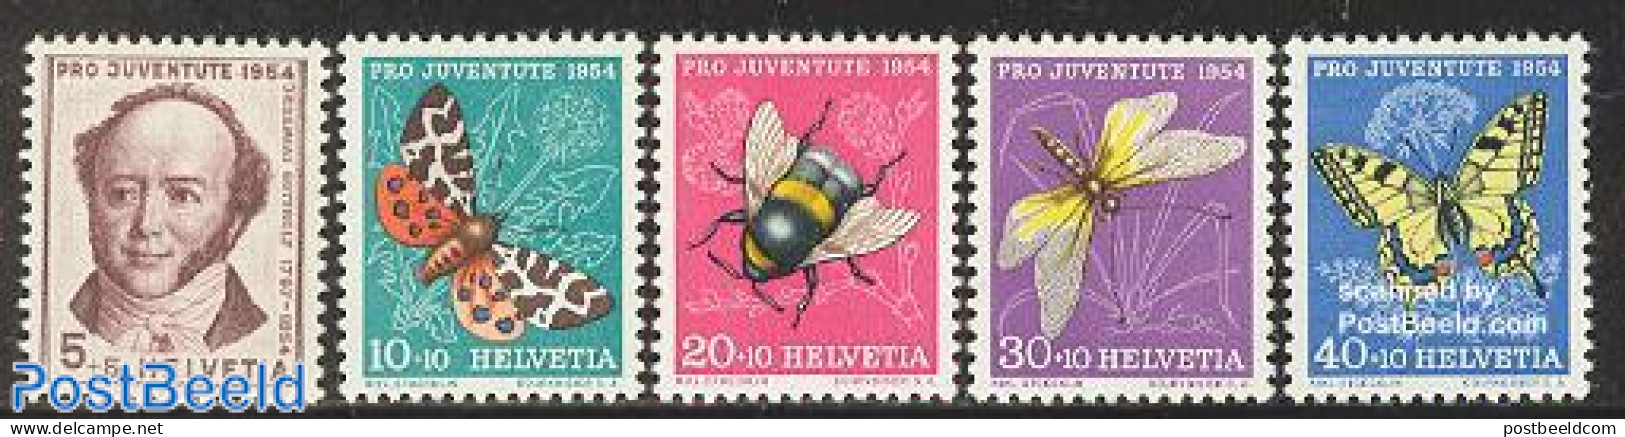 Switzerland 1954 Pro Juventute 5v, Mint NH, Nature - Butterflies - Insects - Art - Authors - Nuovi